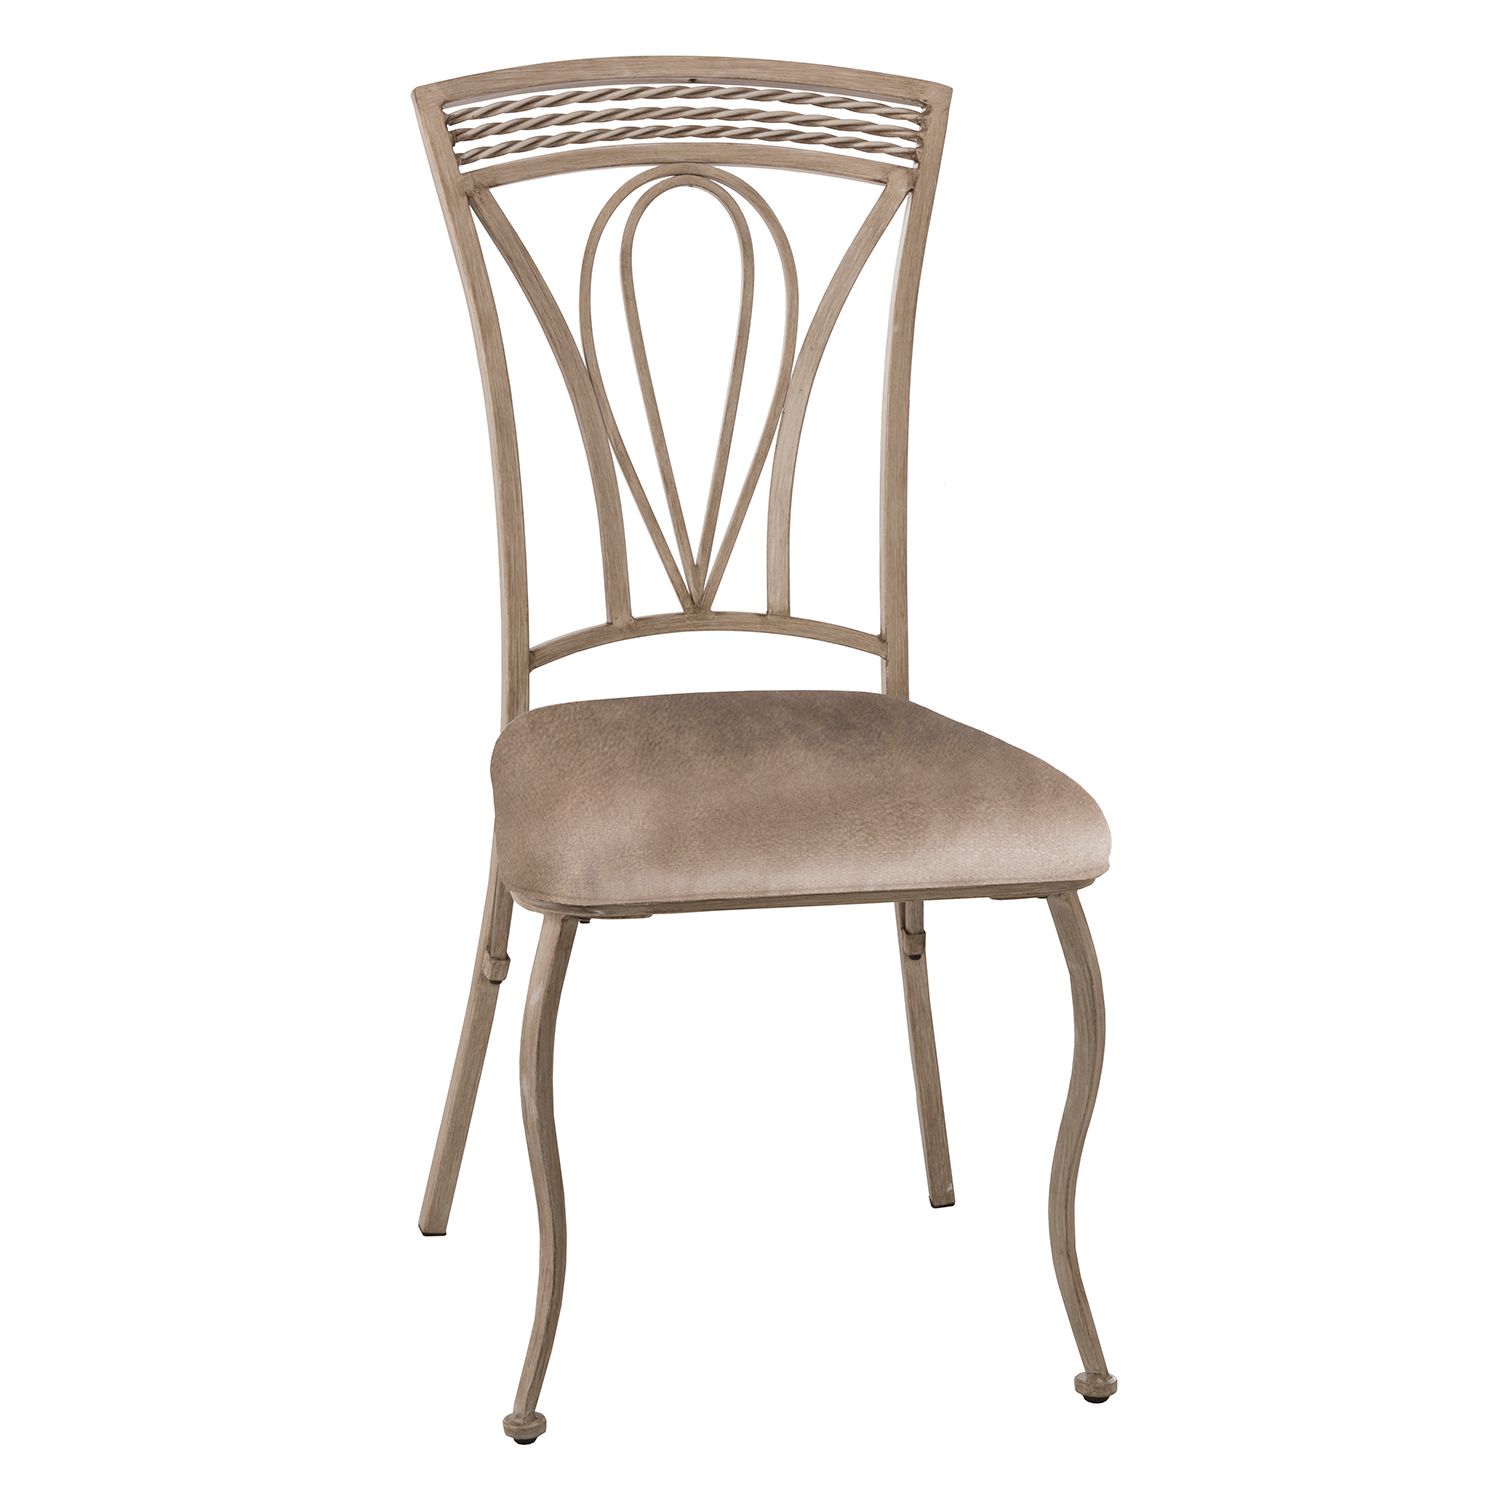 Image for Hillsdale Furniture Napier Dining Chair 2-piece Set at Kohl's.